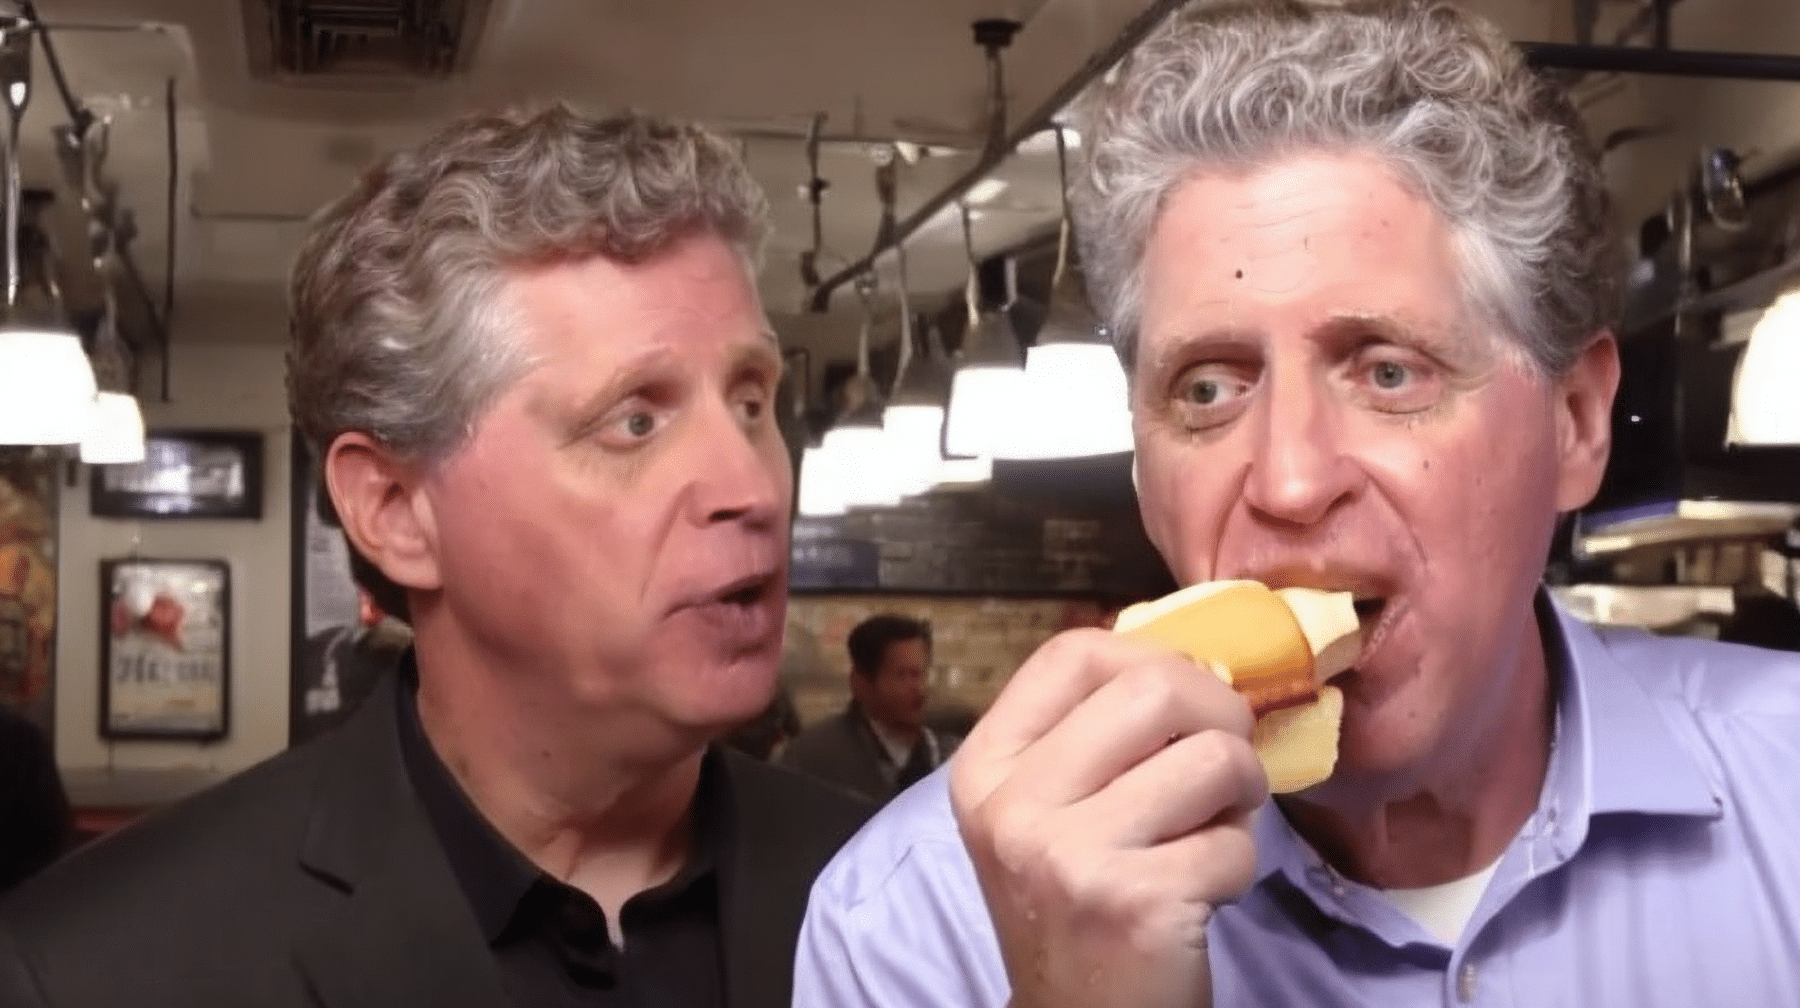 Rhode Island News: Governor McKee Cancels Multimillion-Dollar Contract Over Improperly Prepared Cheesesteak